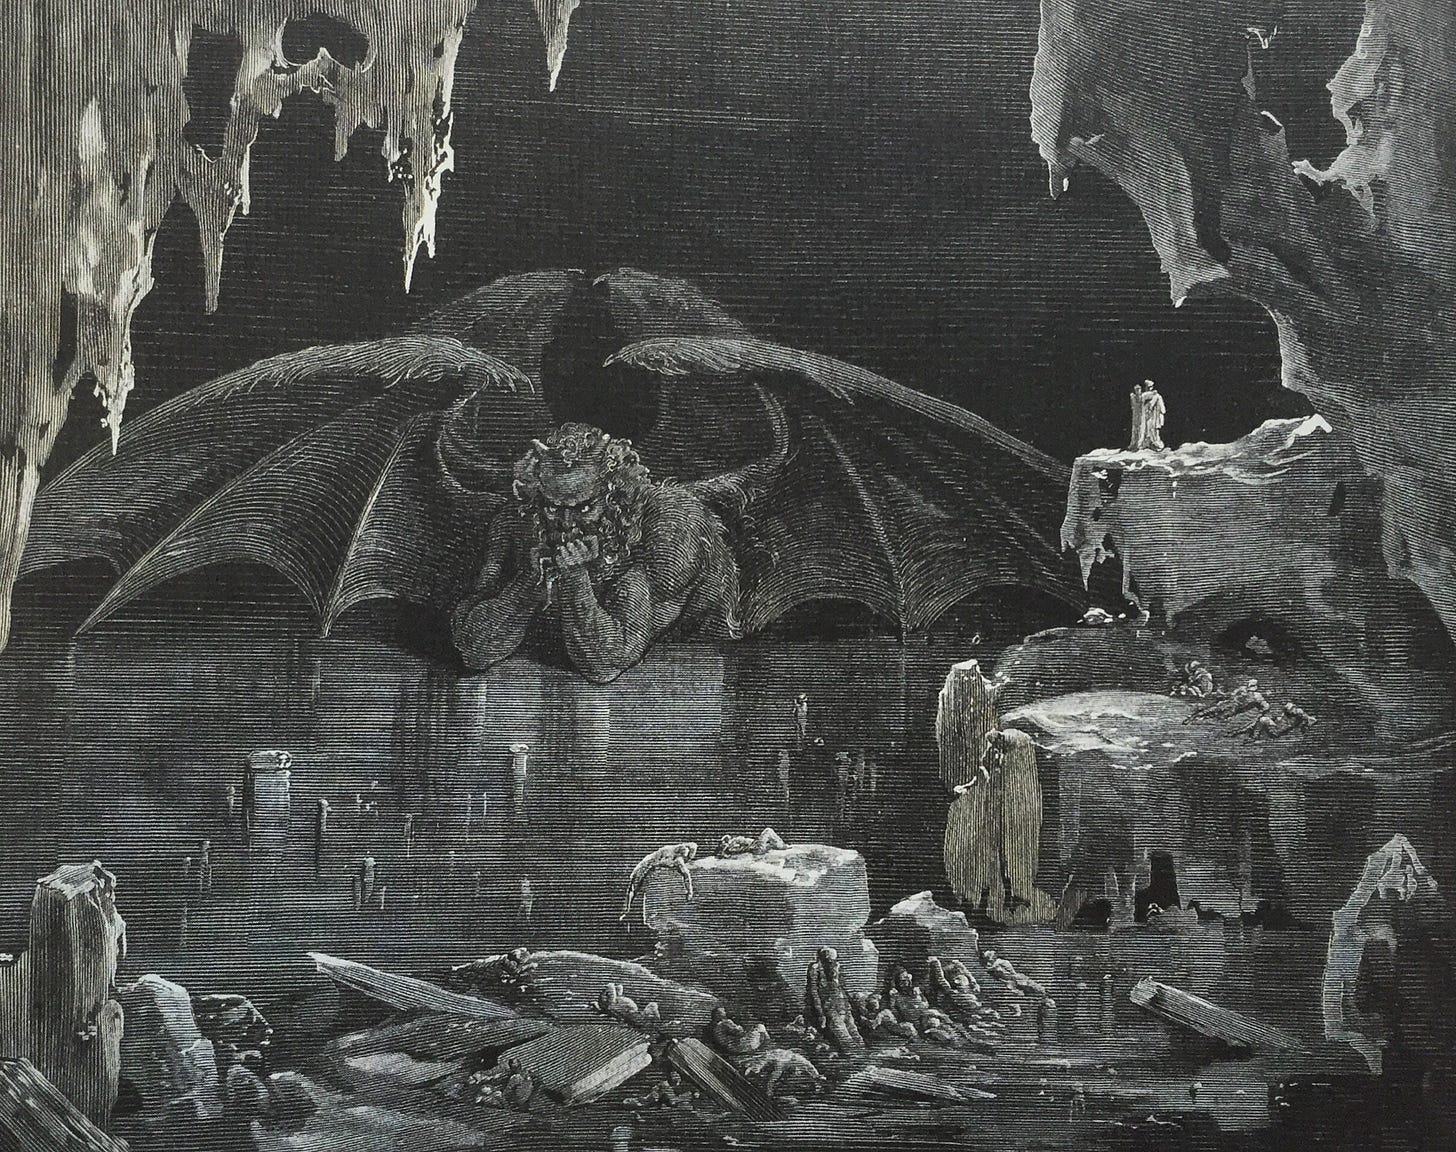 Ricker Library on X: "Ricker Library's 13 Days of Halloween, Day 10: " Lucifer in Judecca", Gustave Dore, 1861-1868: https://t.co/YreLxx5EOJ  #PageFrights https://t.co/USVaWMUlUQ" / X